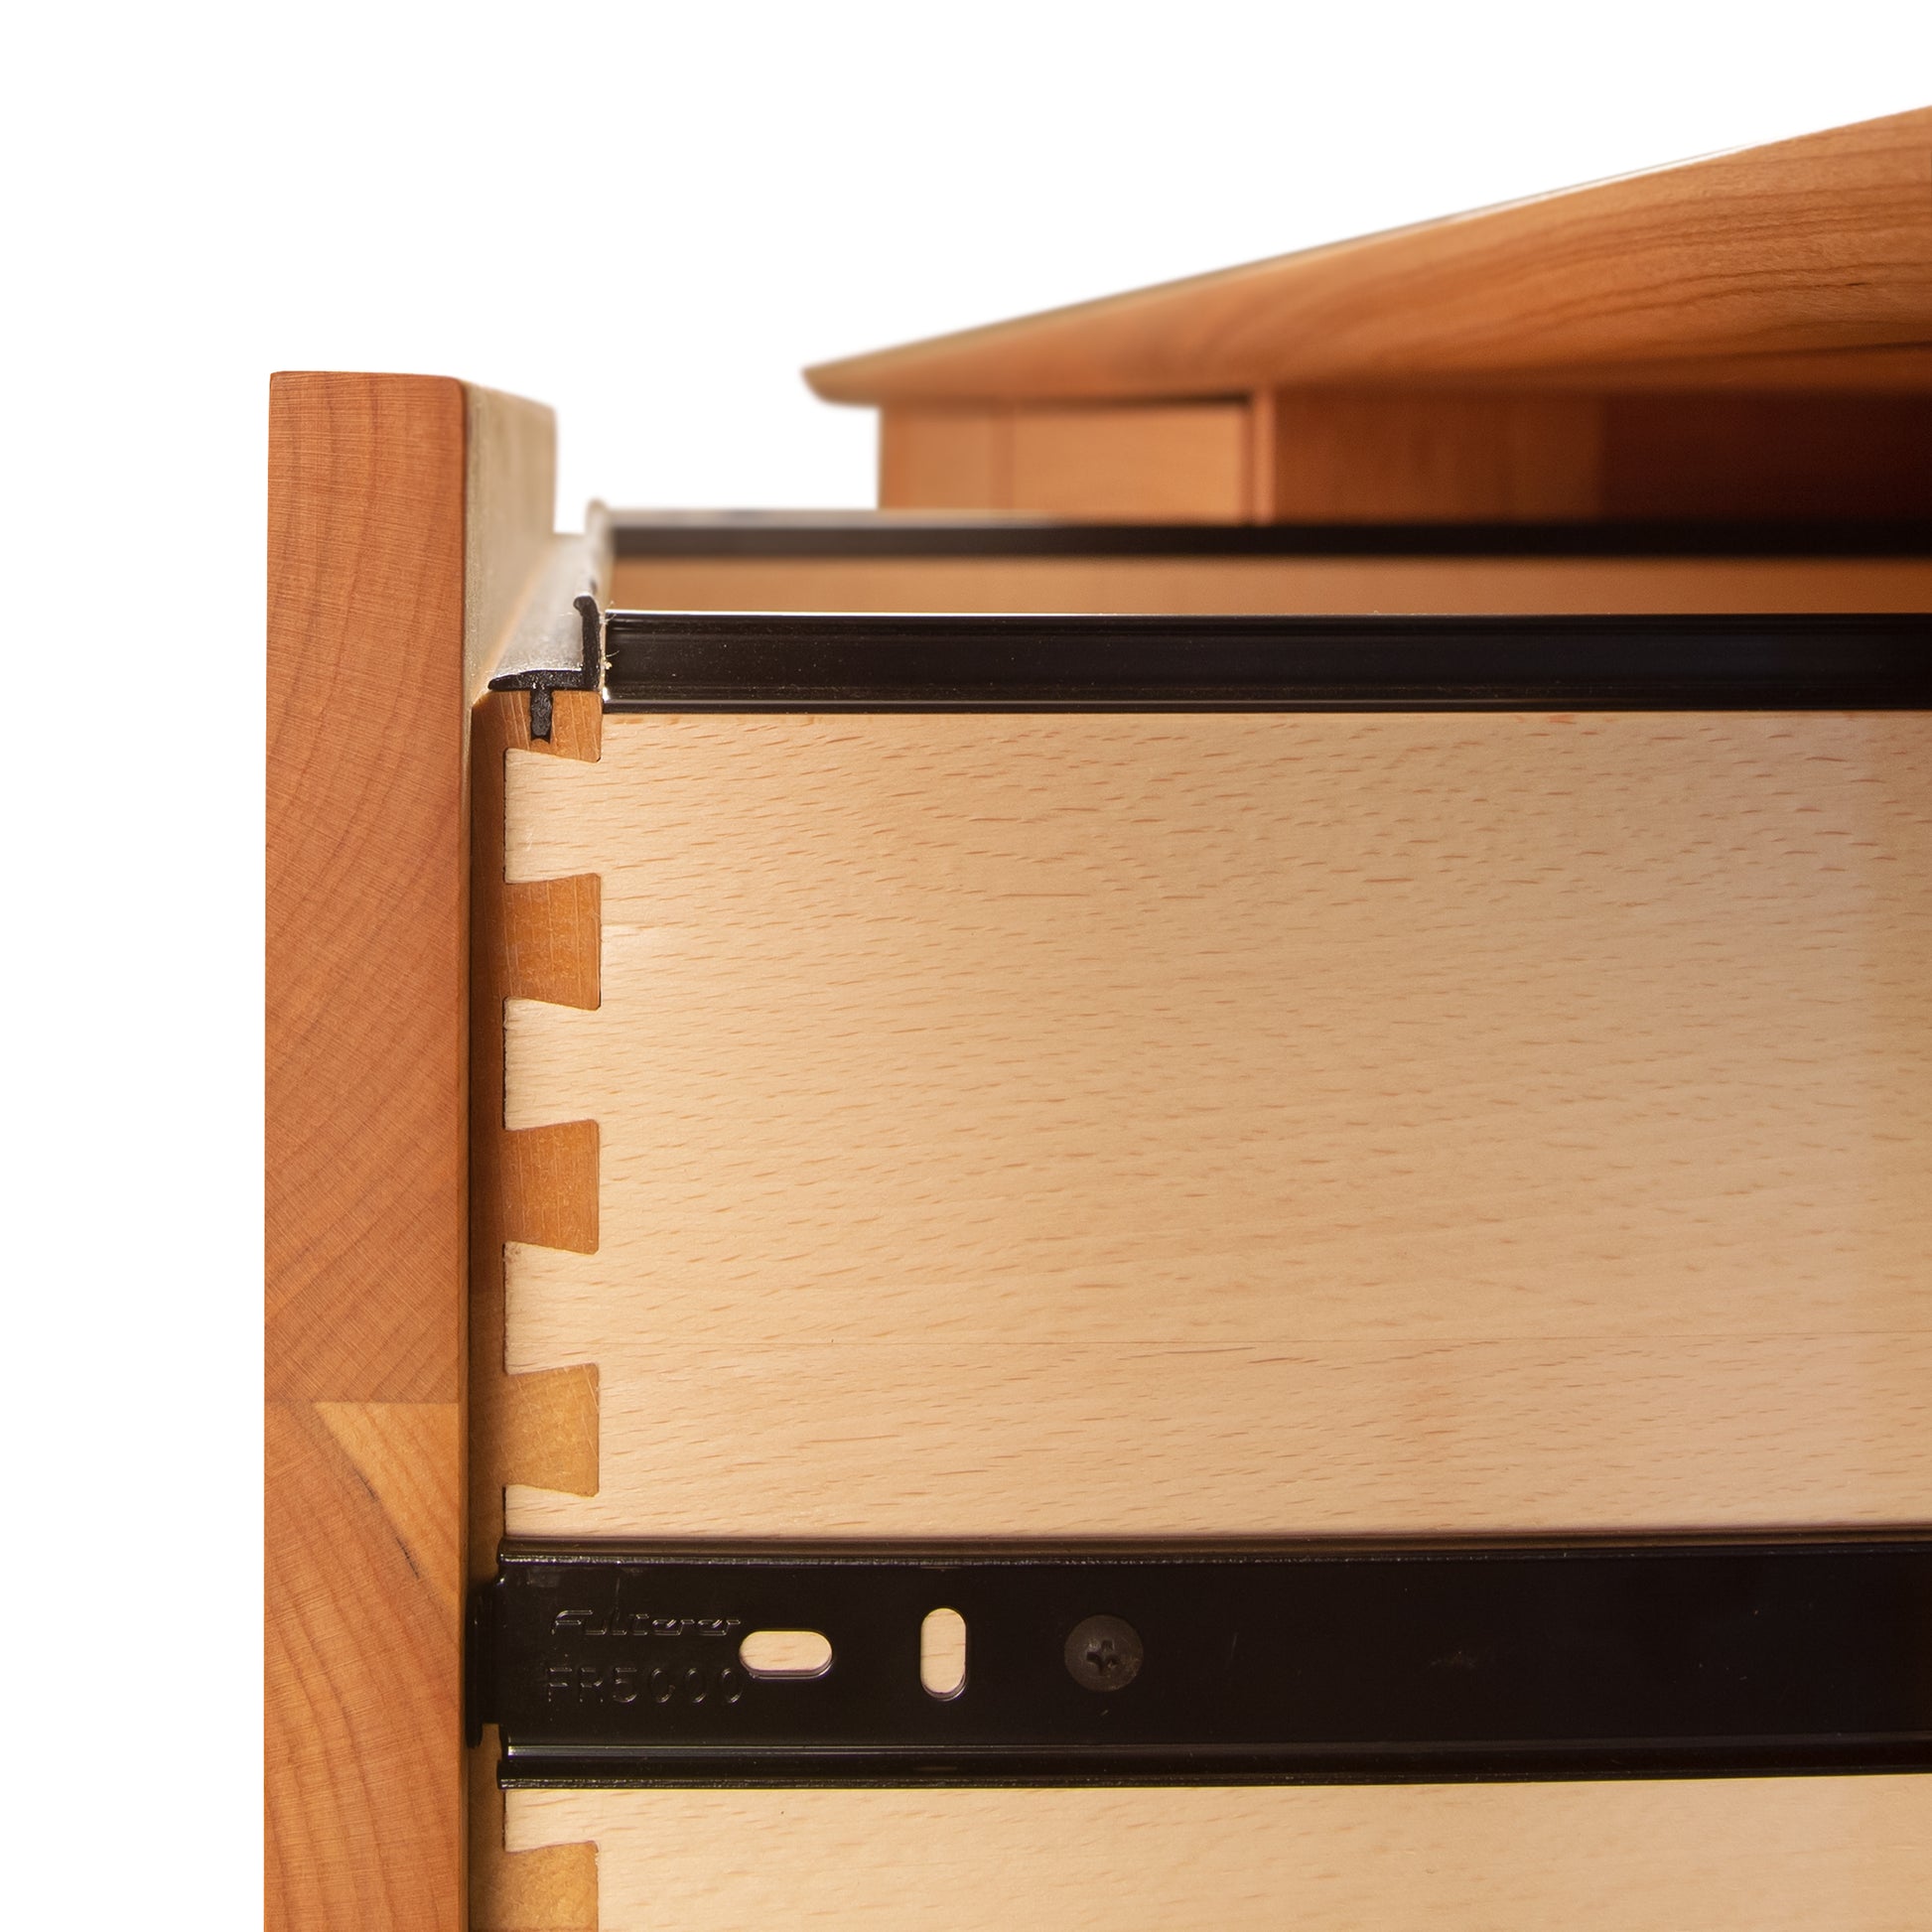 Close-up of a Vermont Furniture Designs Heartwood Shaker 6-Drawer Legal File Cabinet with dovetail joints, partially open to reveal a legal size file hanger frame inside.